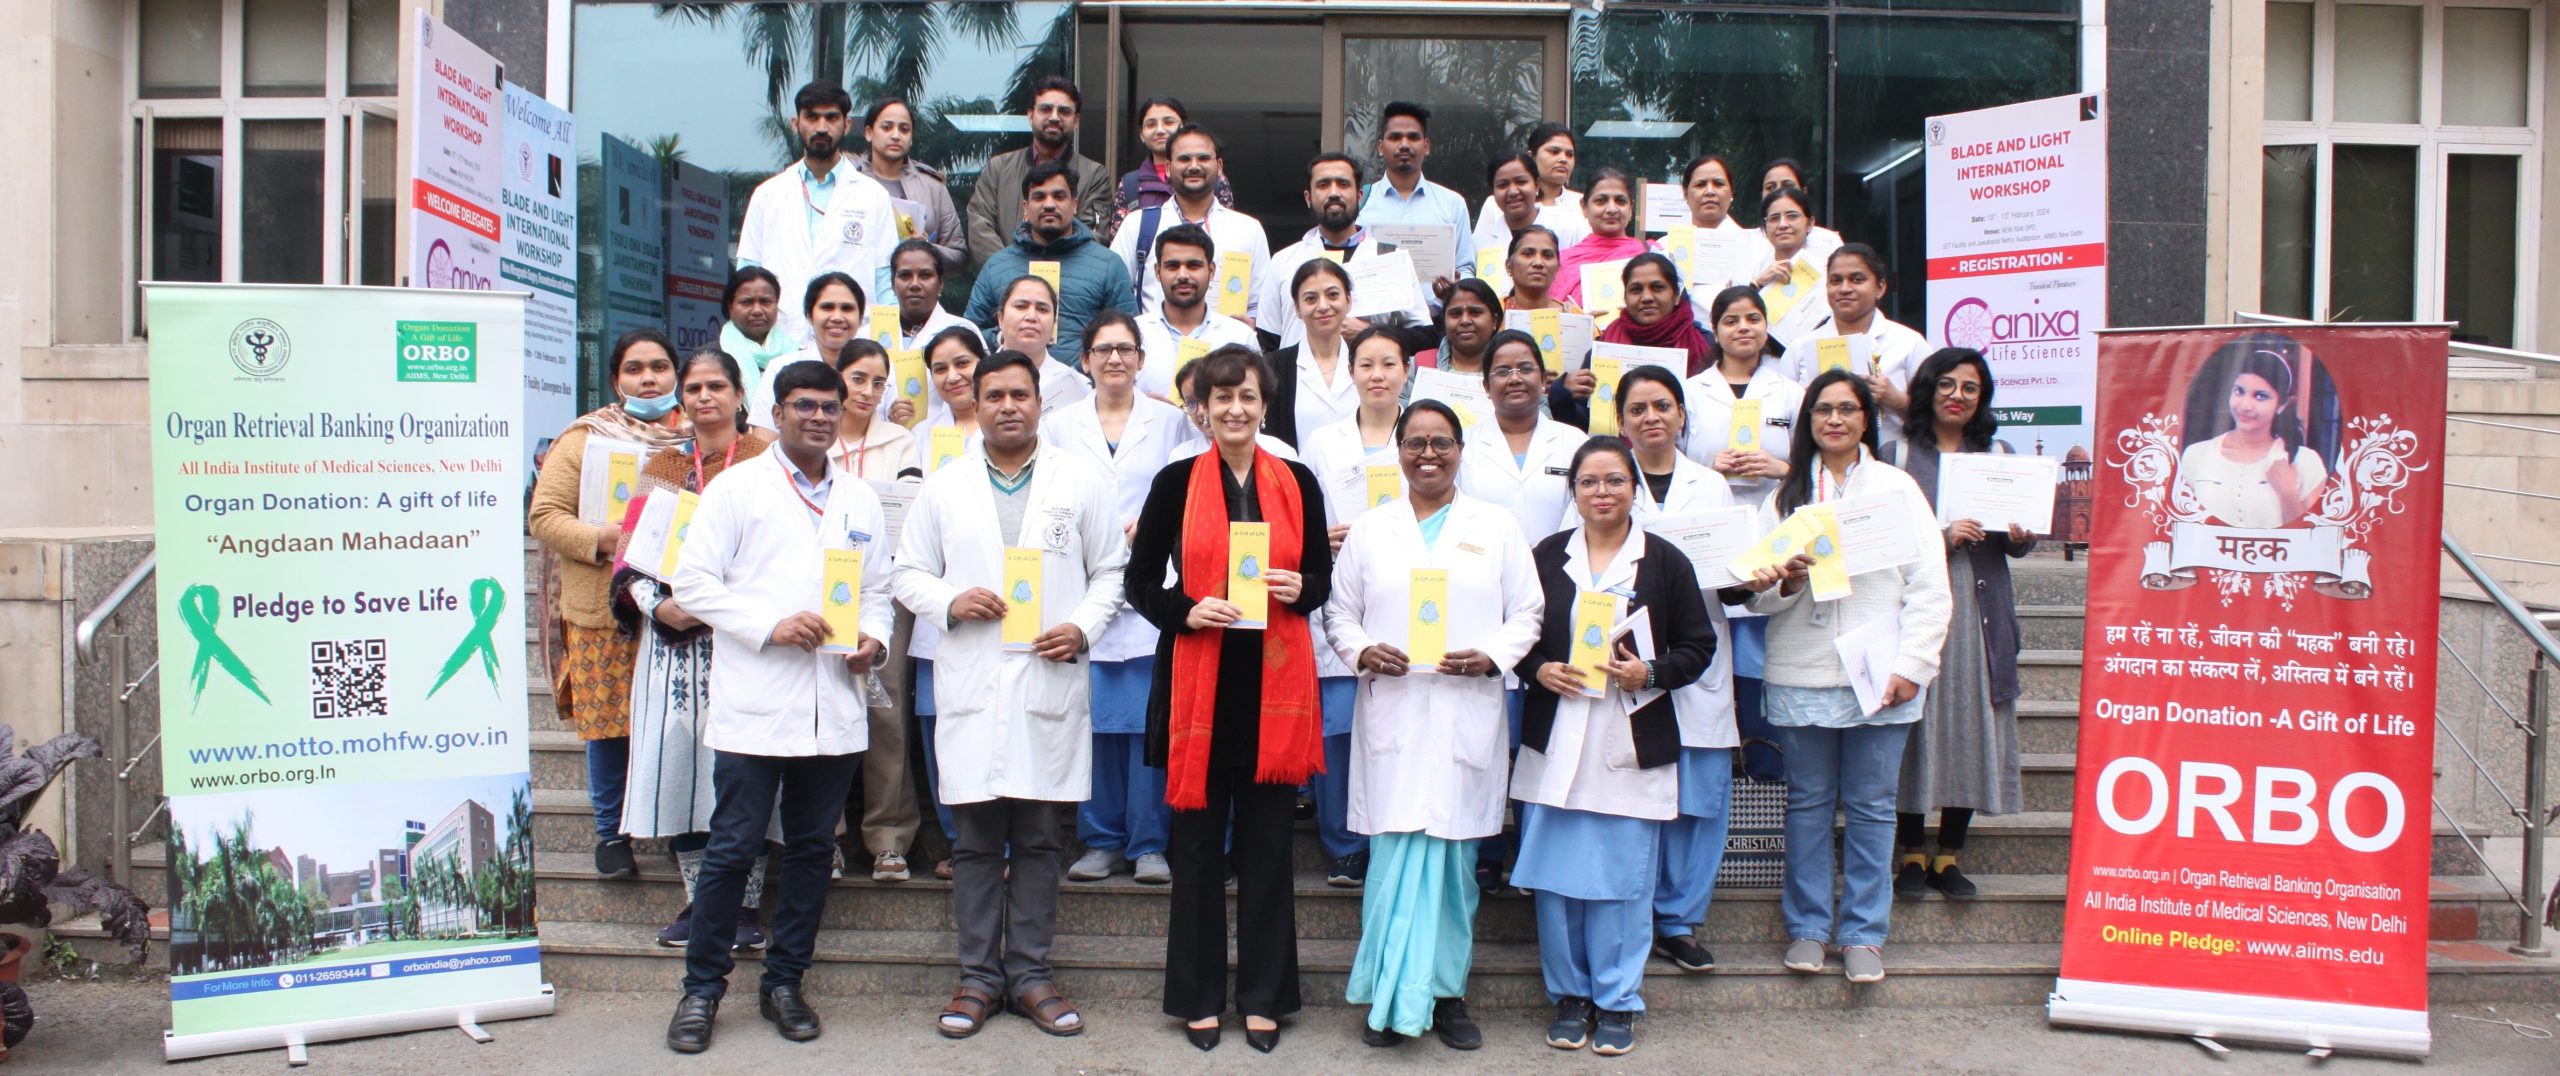 Organ Donation Training & Awareness Session for Critical Care Nurses at AIIMS